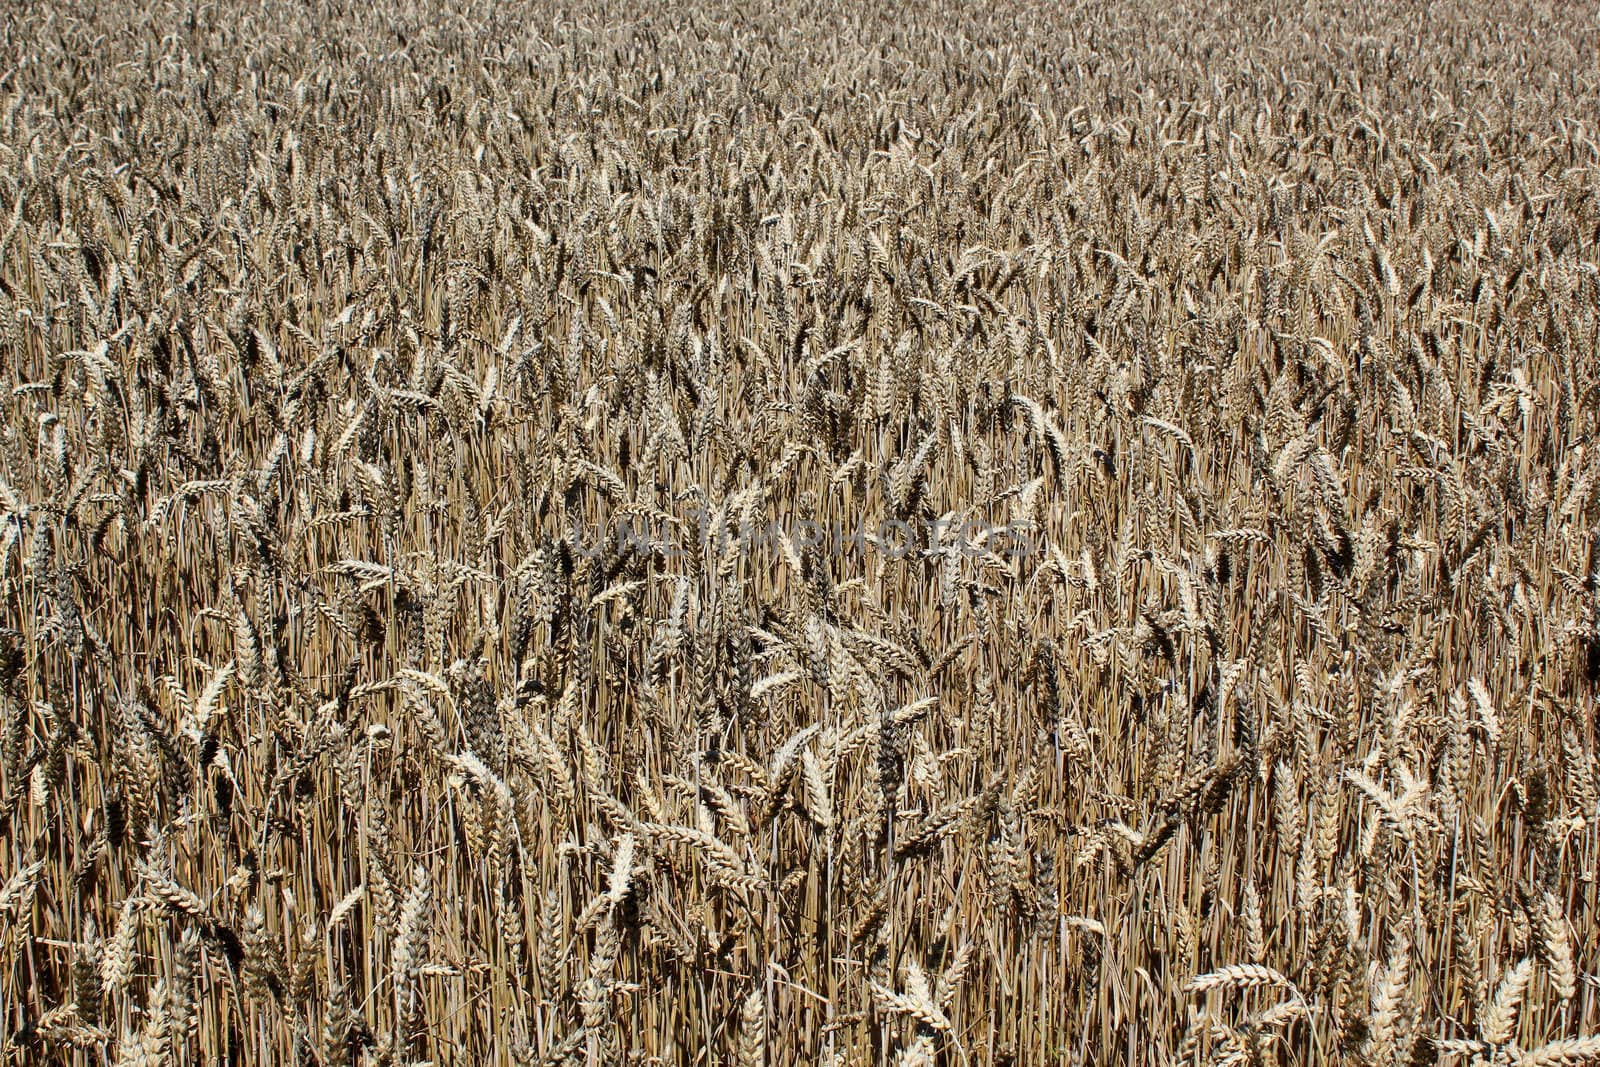 Close up of a gold wheat field by summer